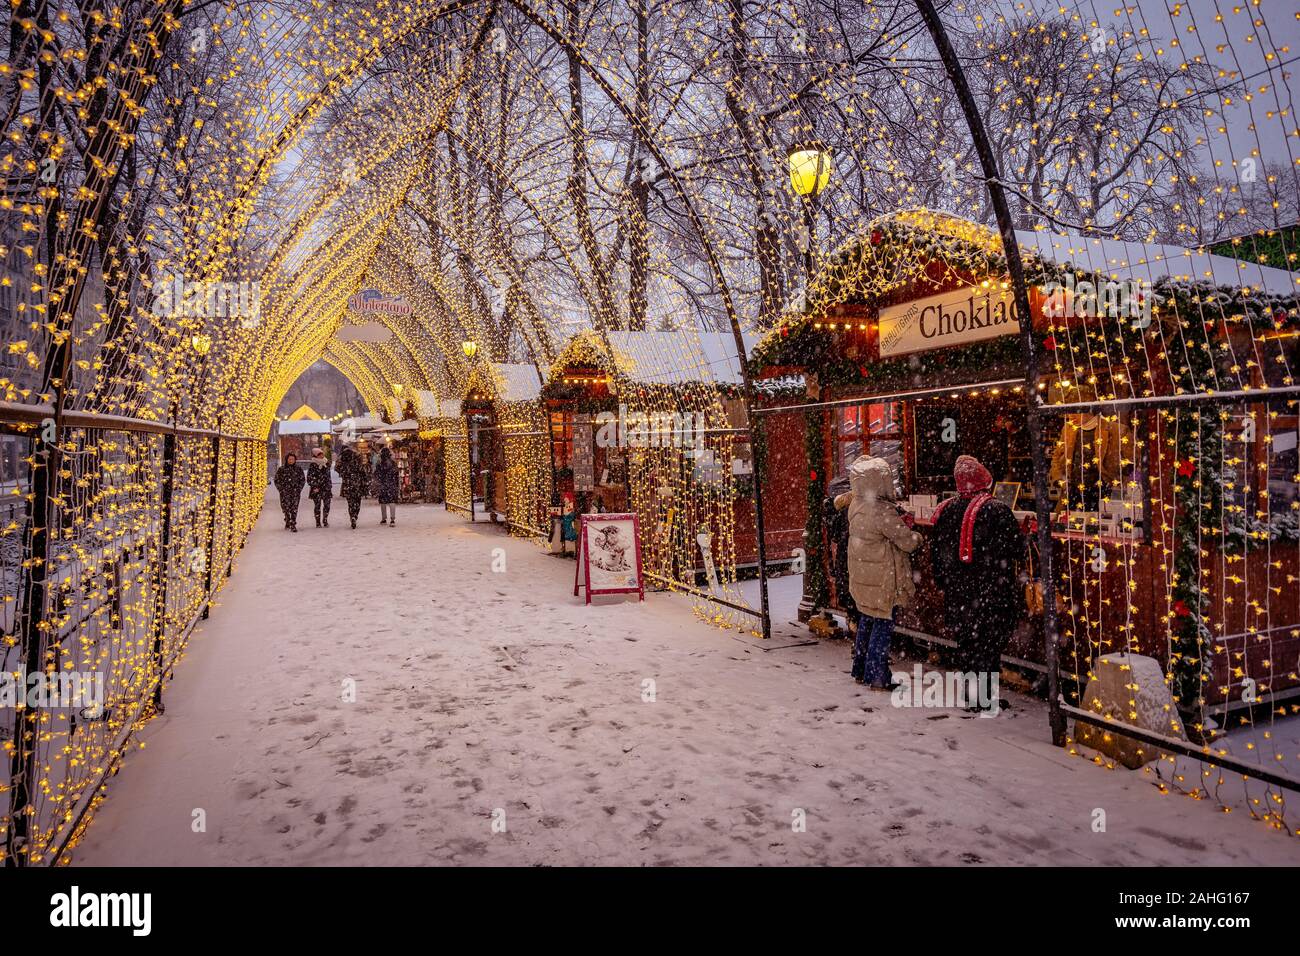 Oslo, Norway - Traditional Christmas market with falling snow Stock Photo -  Alamy